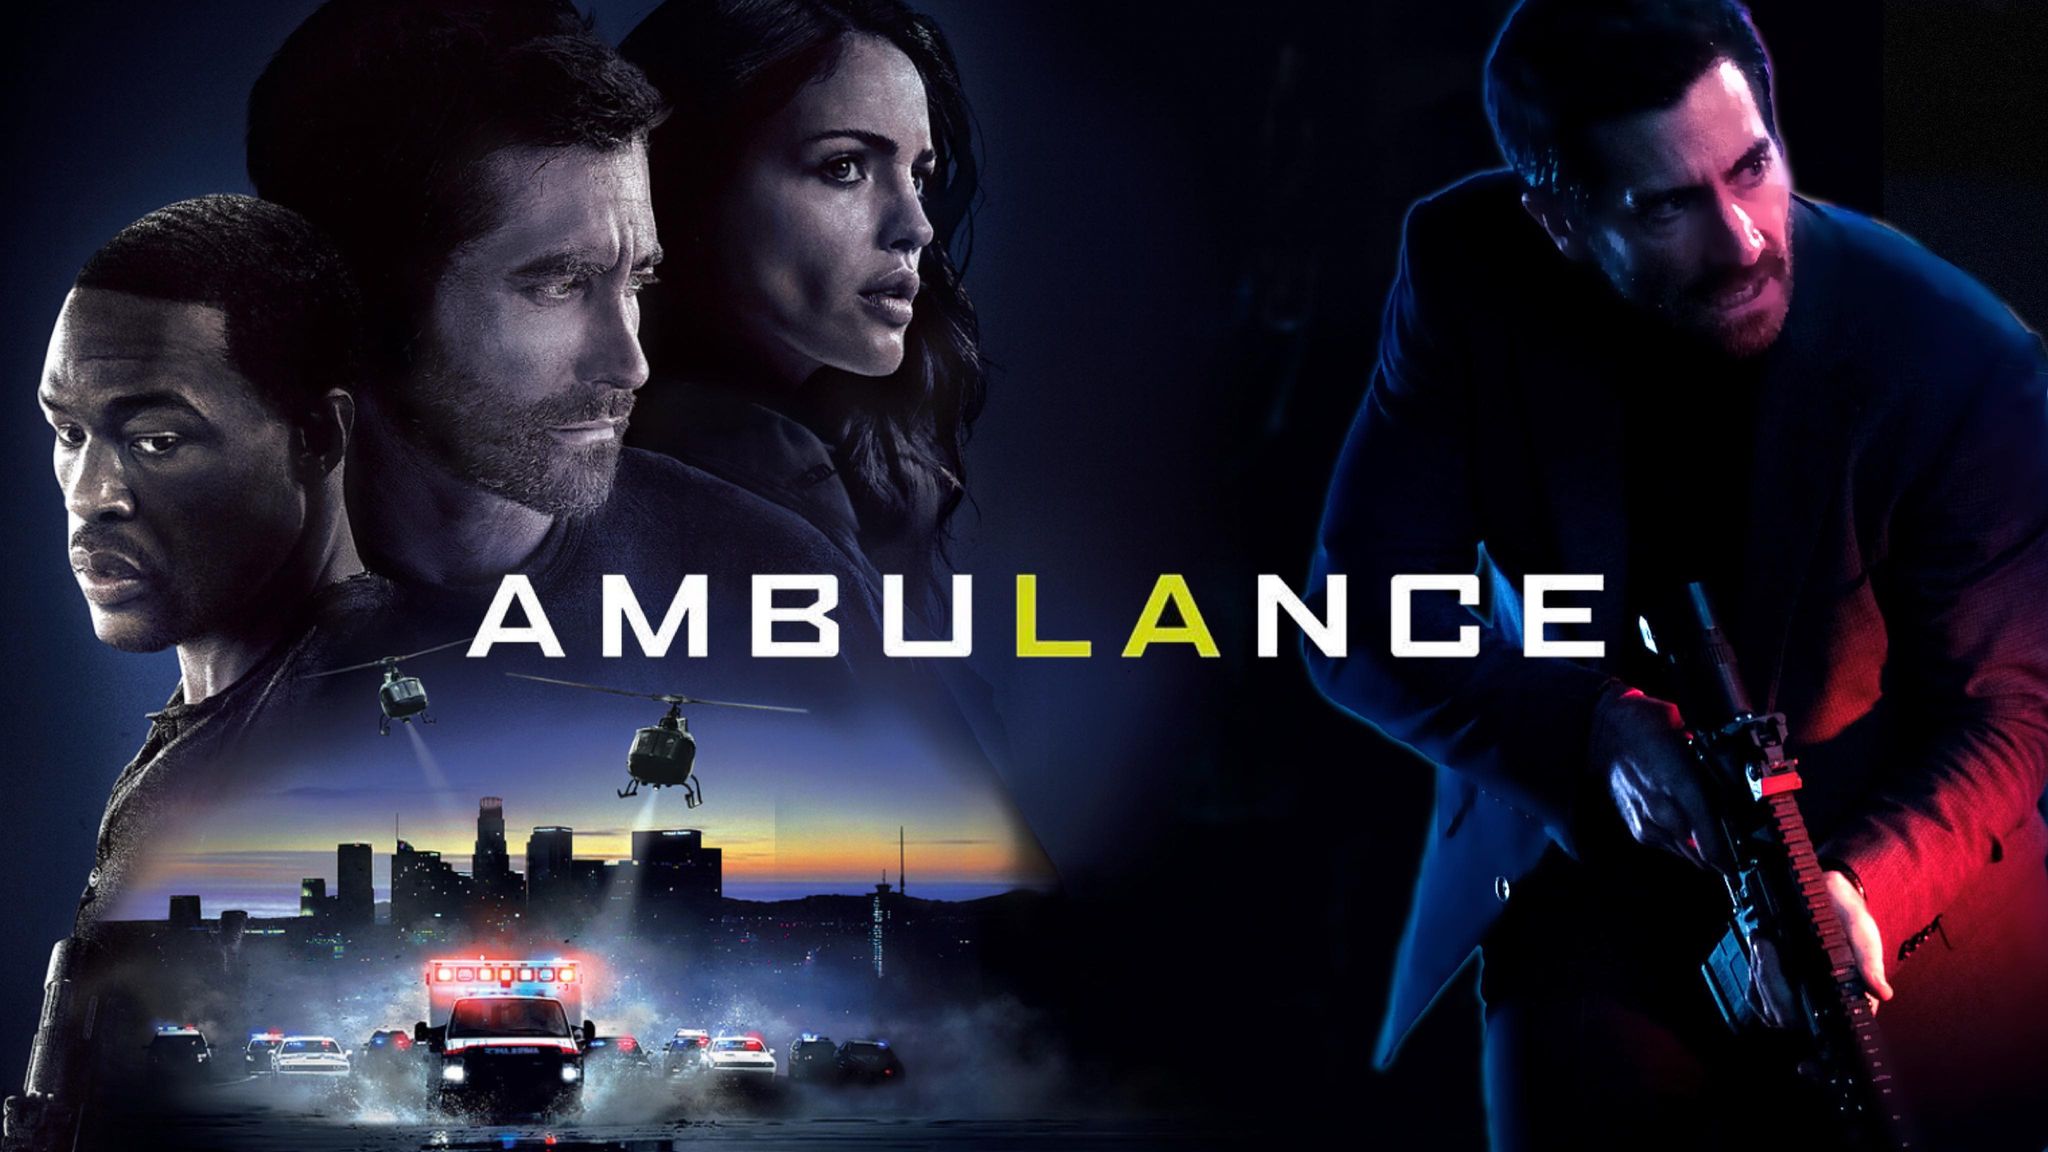 Ambulance Cast: Every Performer and Character in the 2022 Film